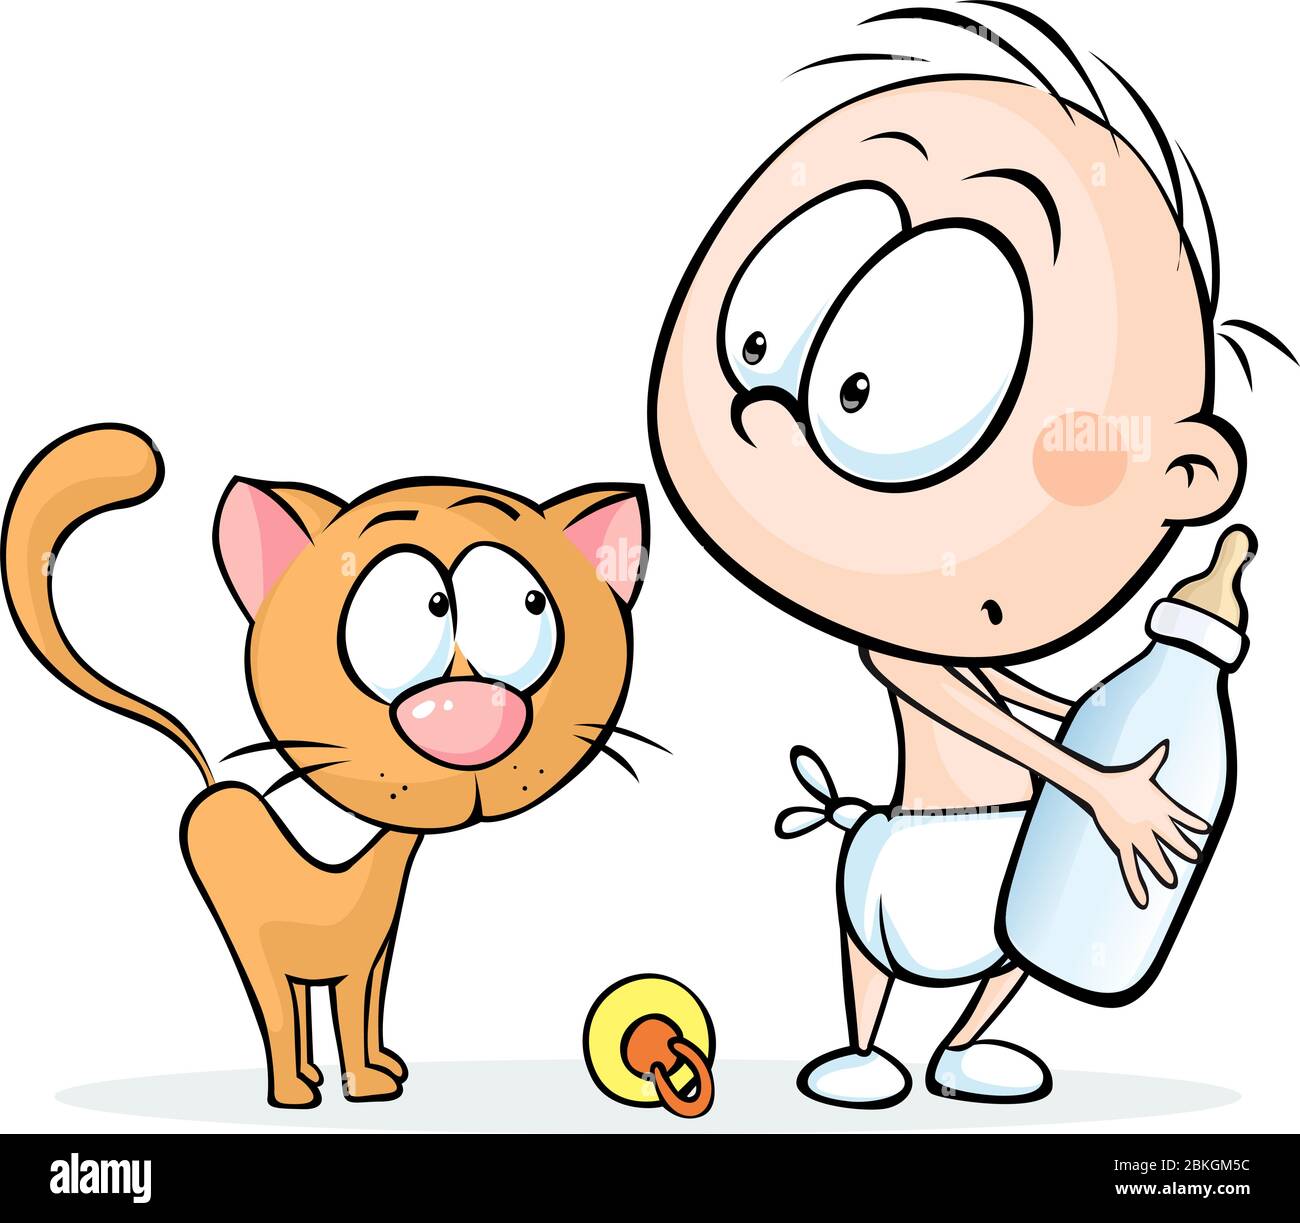 child standing and holding a bottle of milk and a cat watching him - vector illustration Stock Vector